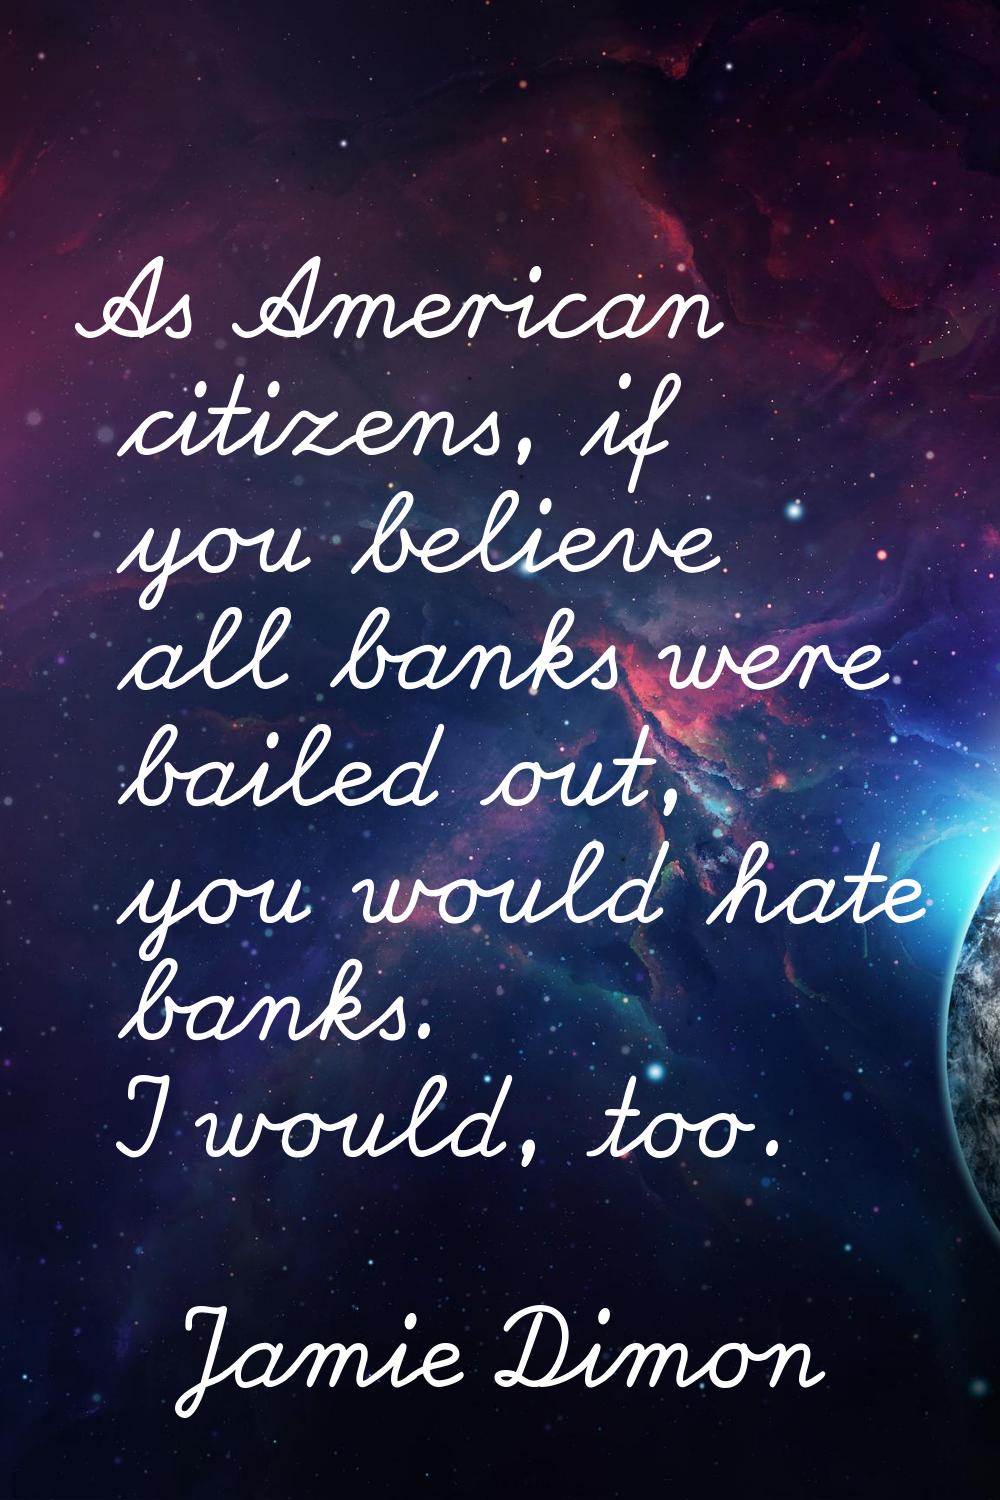 As American citizens, if you believe all banks were bailed out, you would hate banks. I would, too.